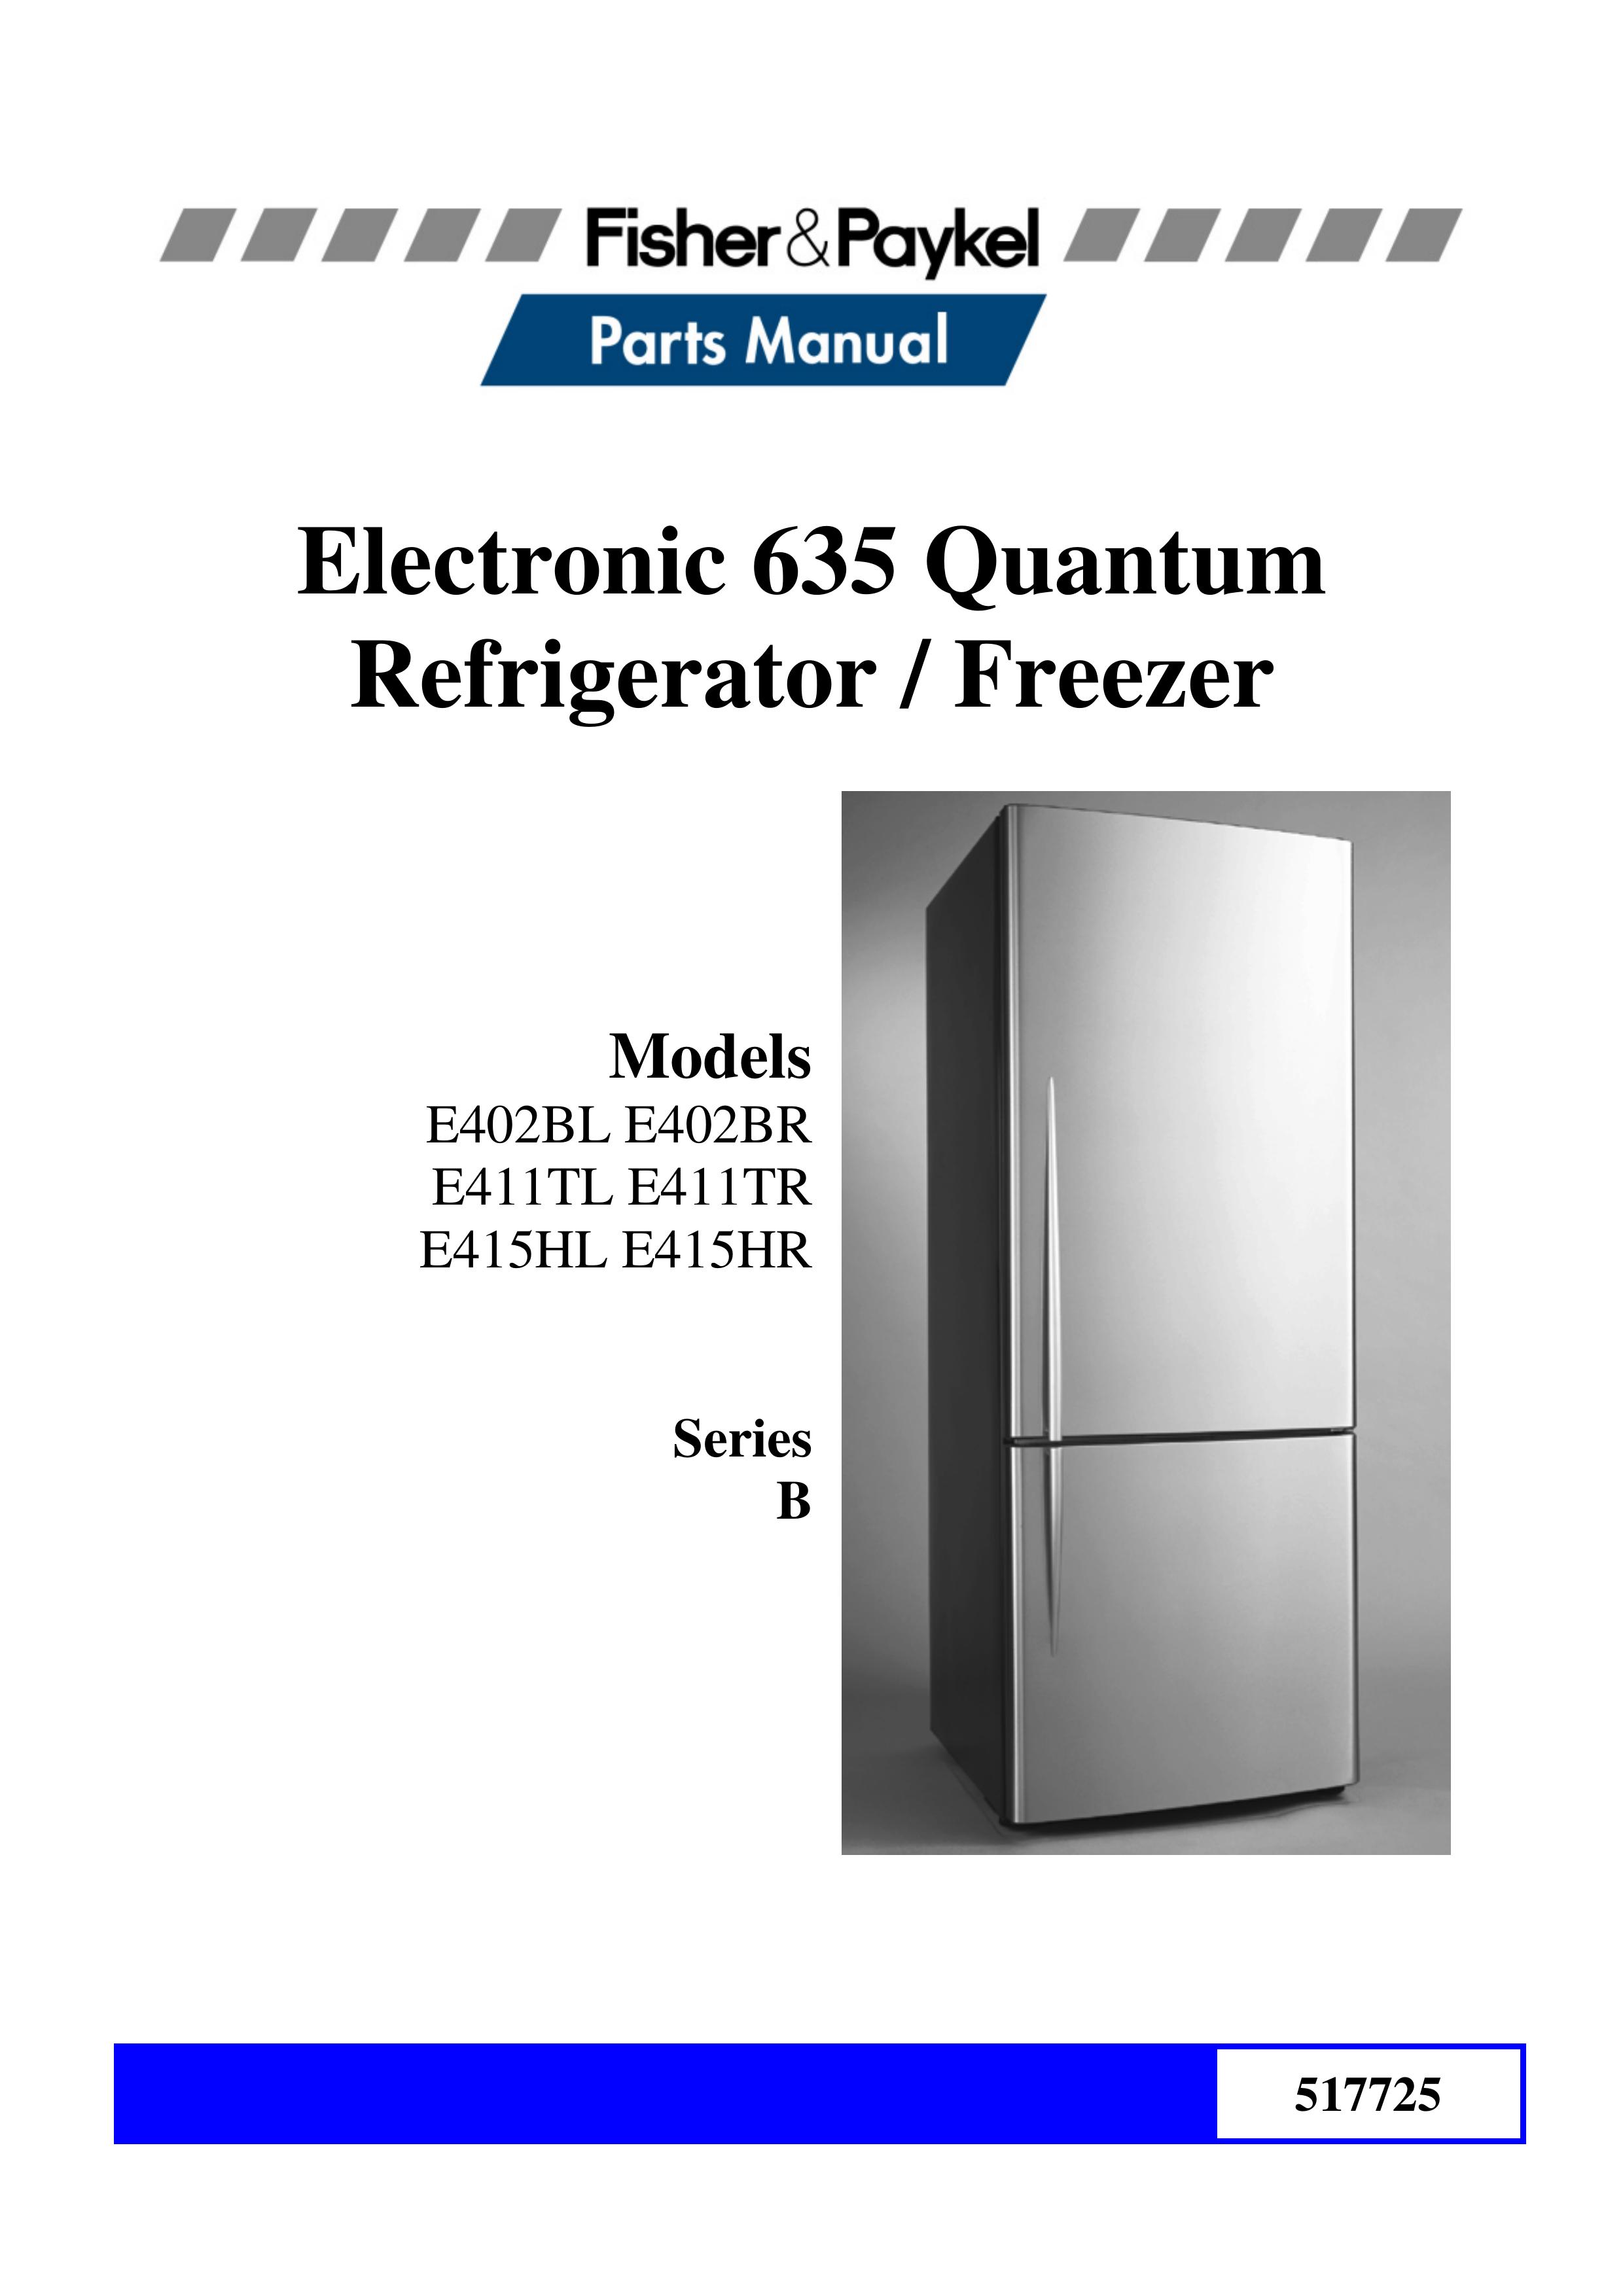 Fisher & Paykel E411TL Refrigerator User Manual